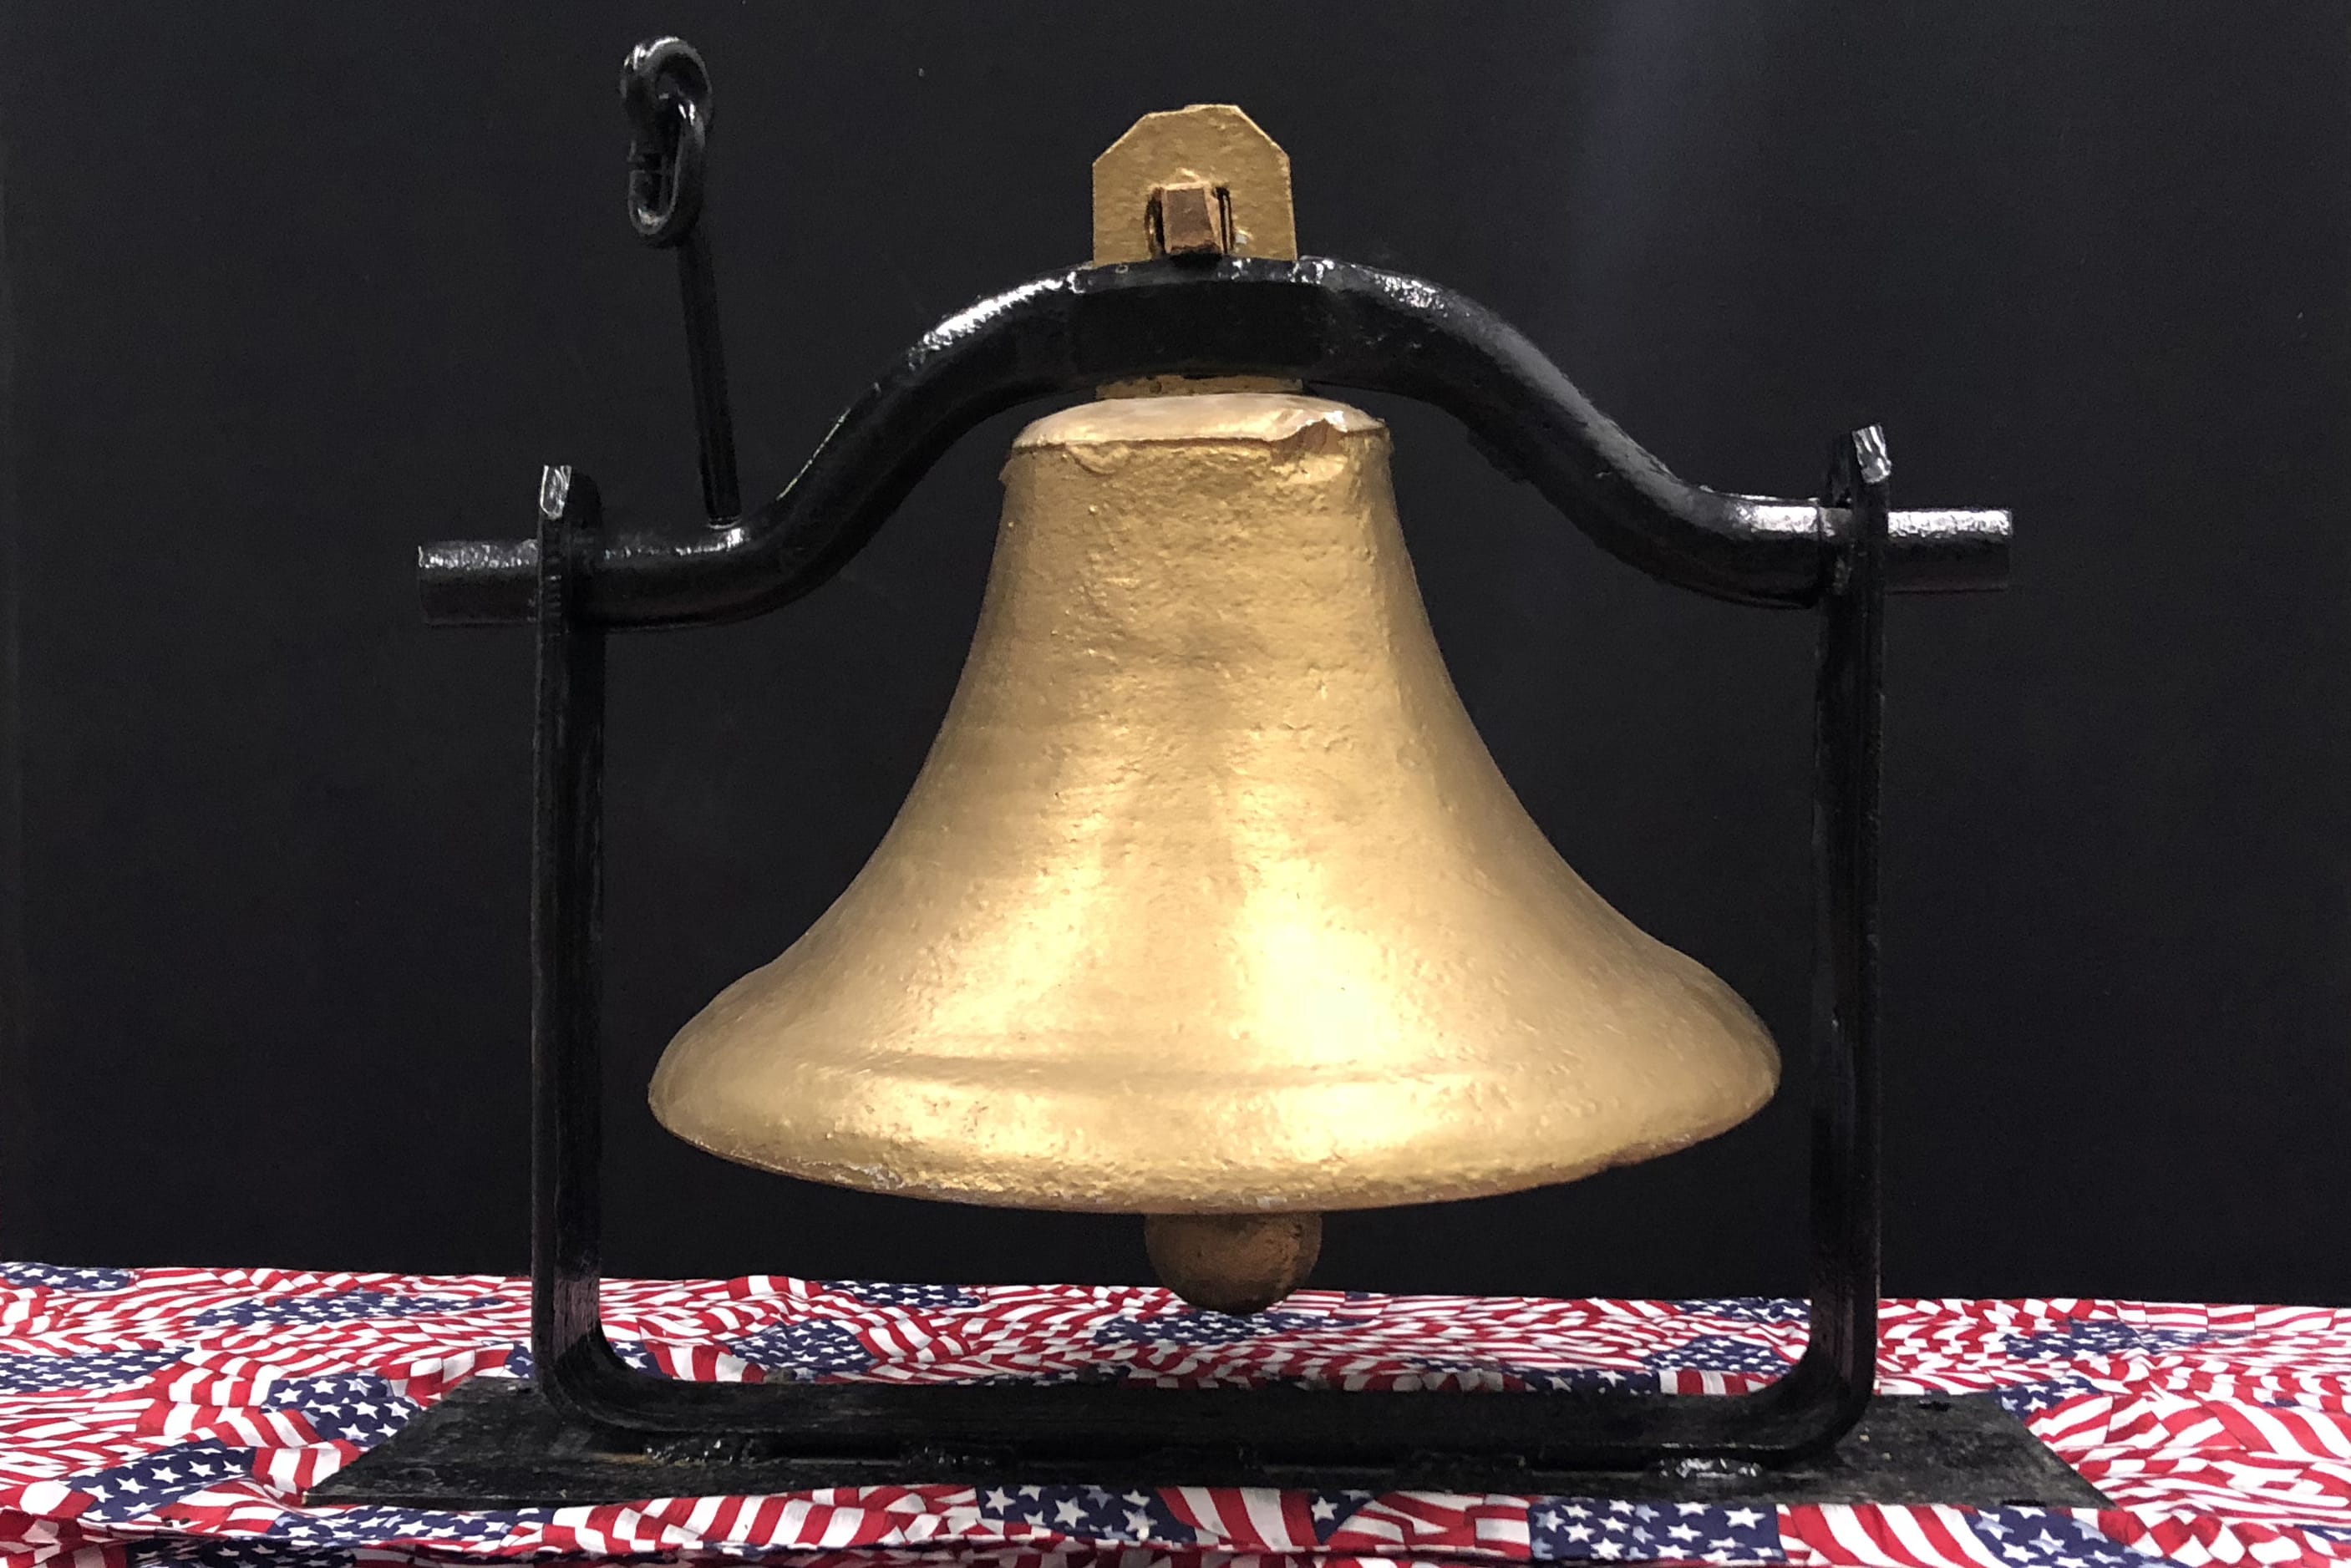 Bell used for "Bells of Peace" event